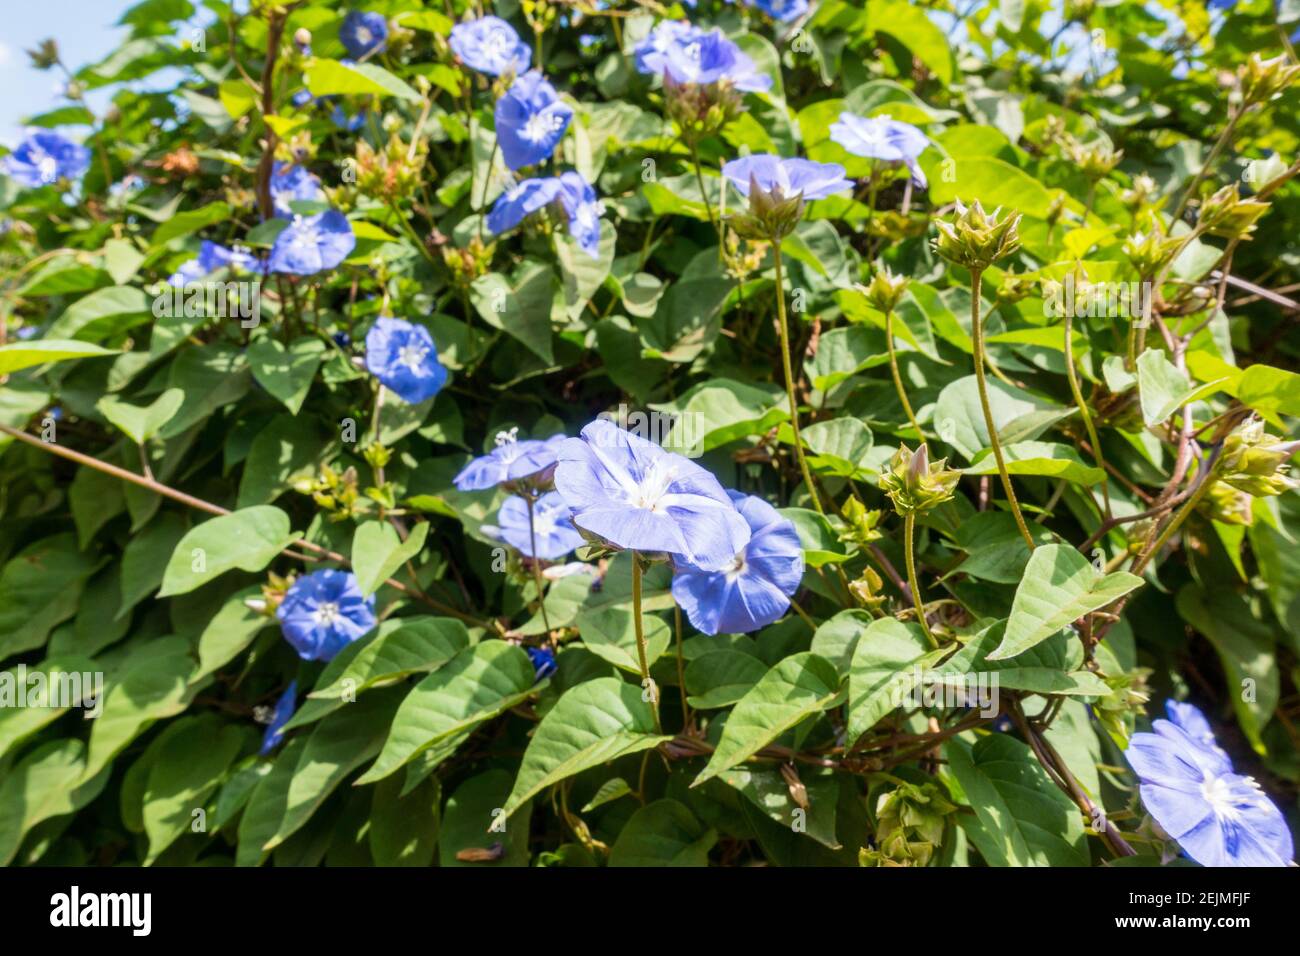 Ipomoea tricolor (Morning glory) Stock Photo